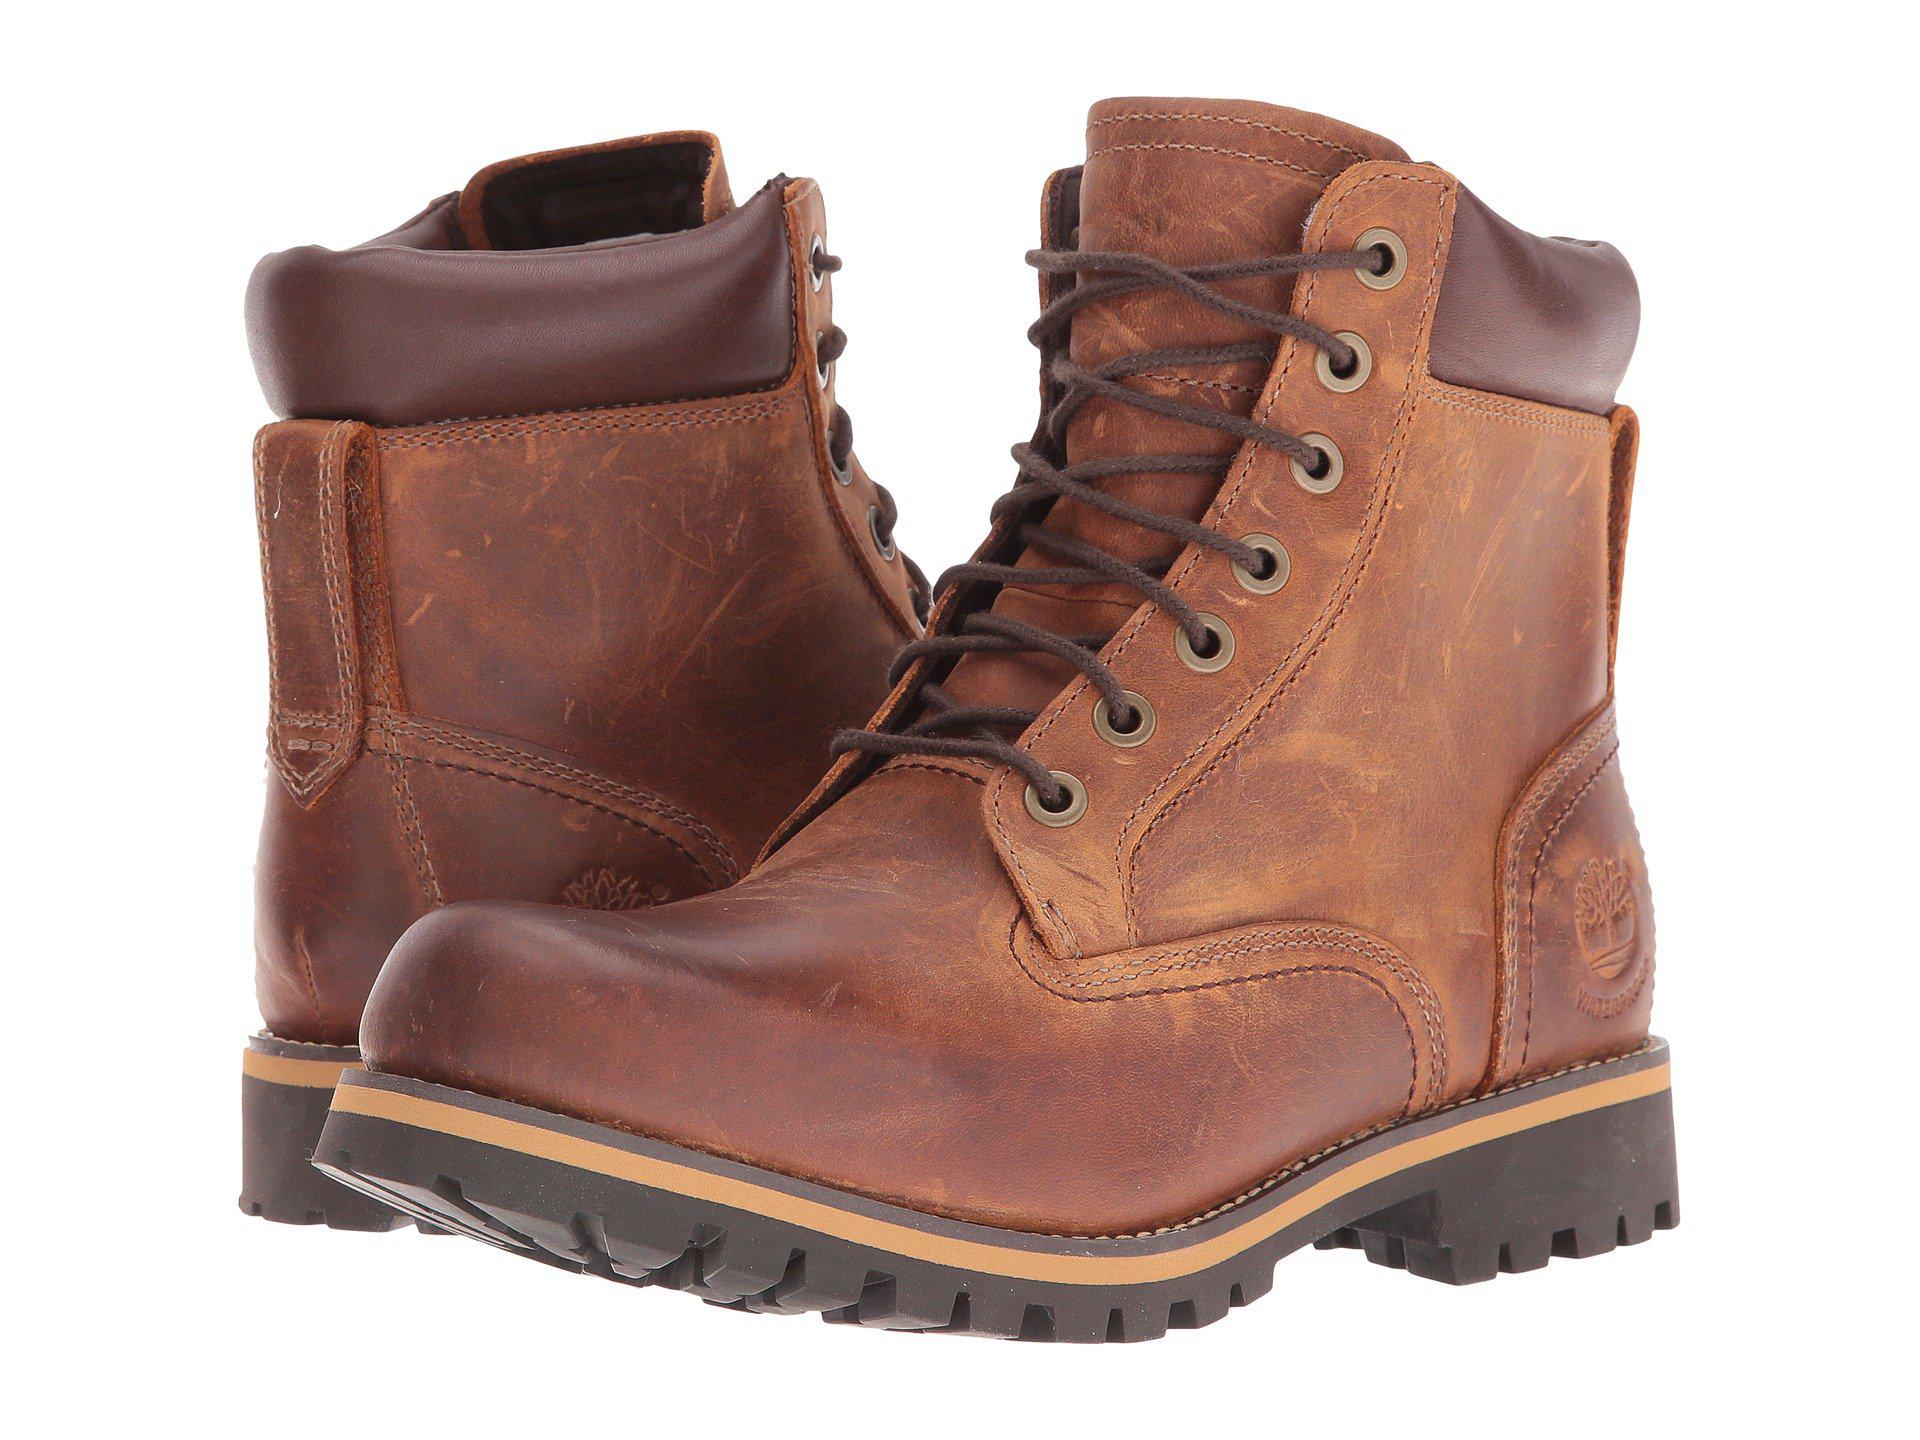 Lyst - Timberland Earthkeepers(r) Rugged 6 Boot (md Brown Full Grain